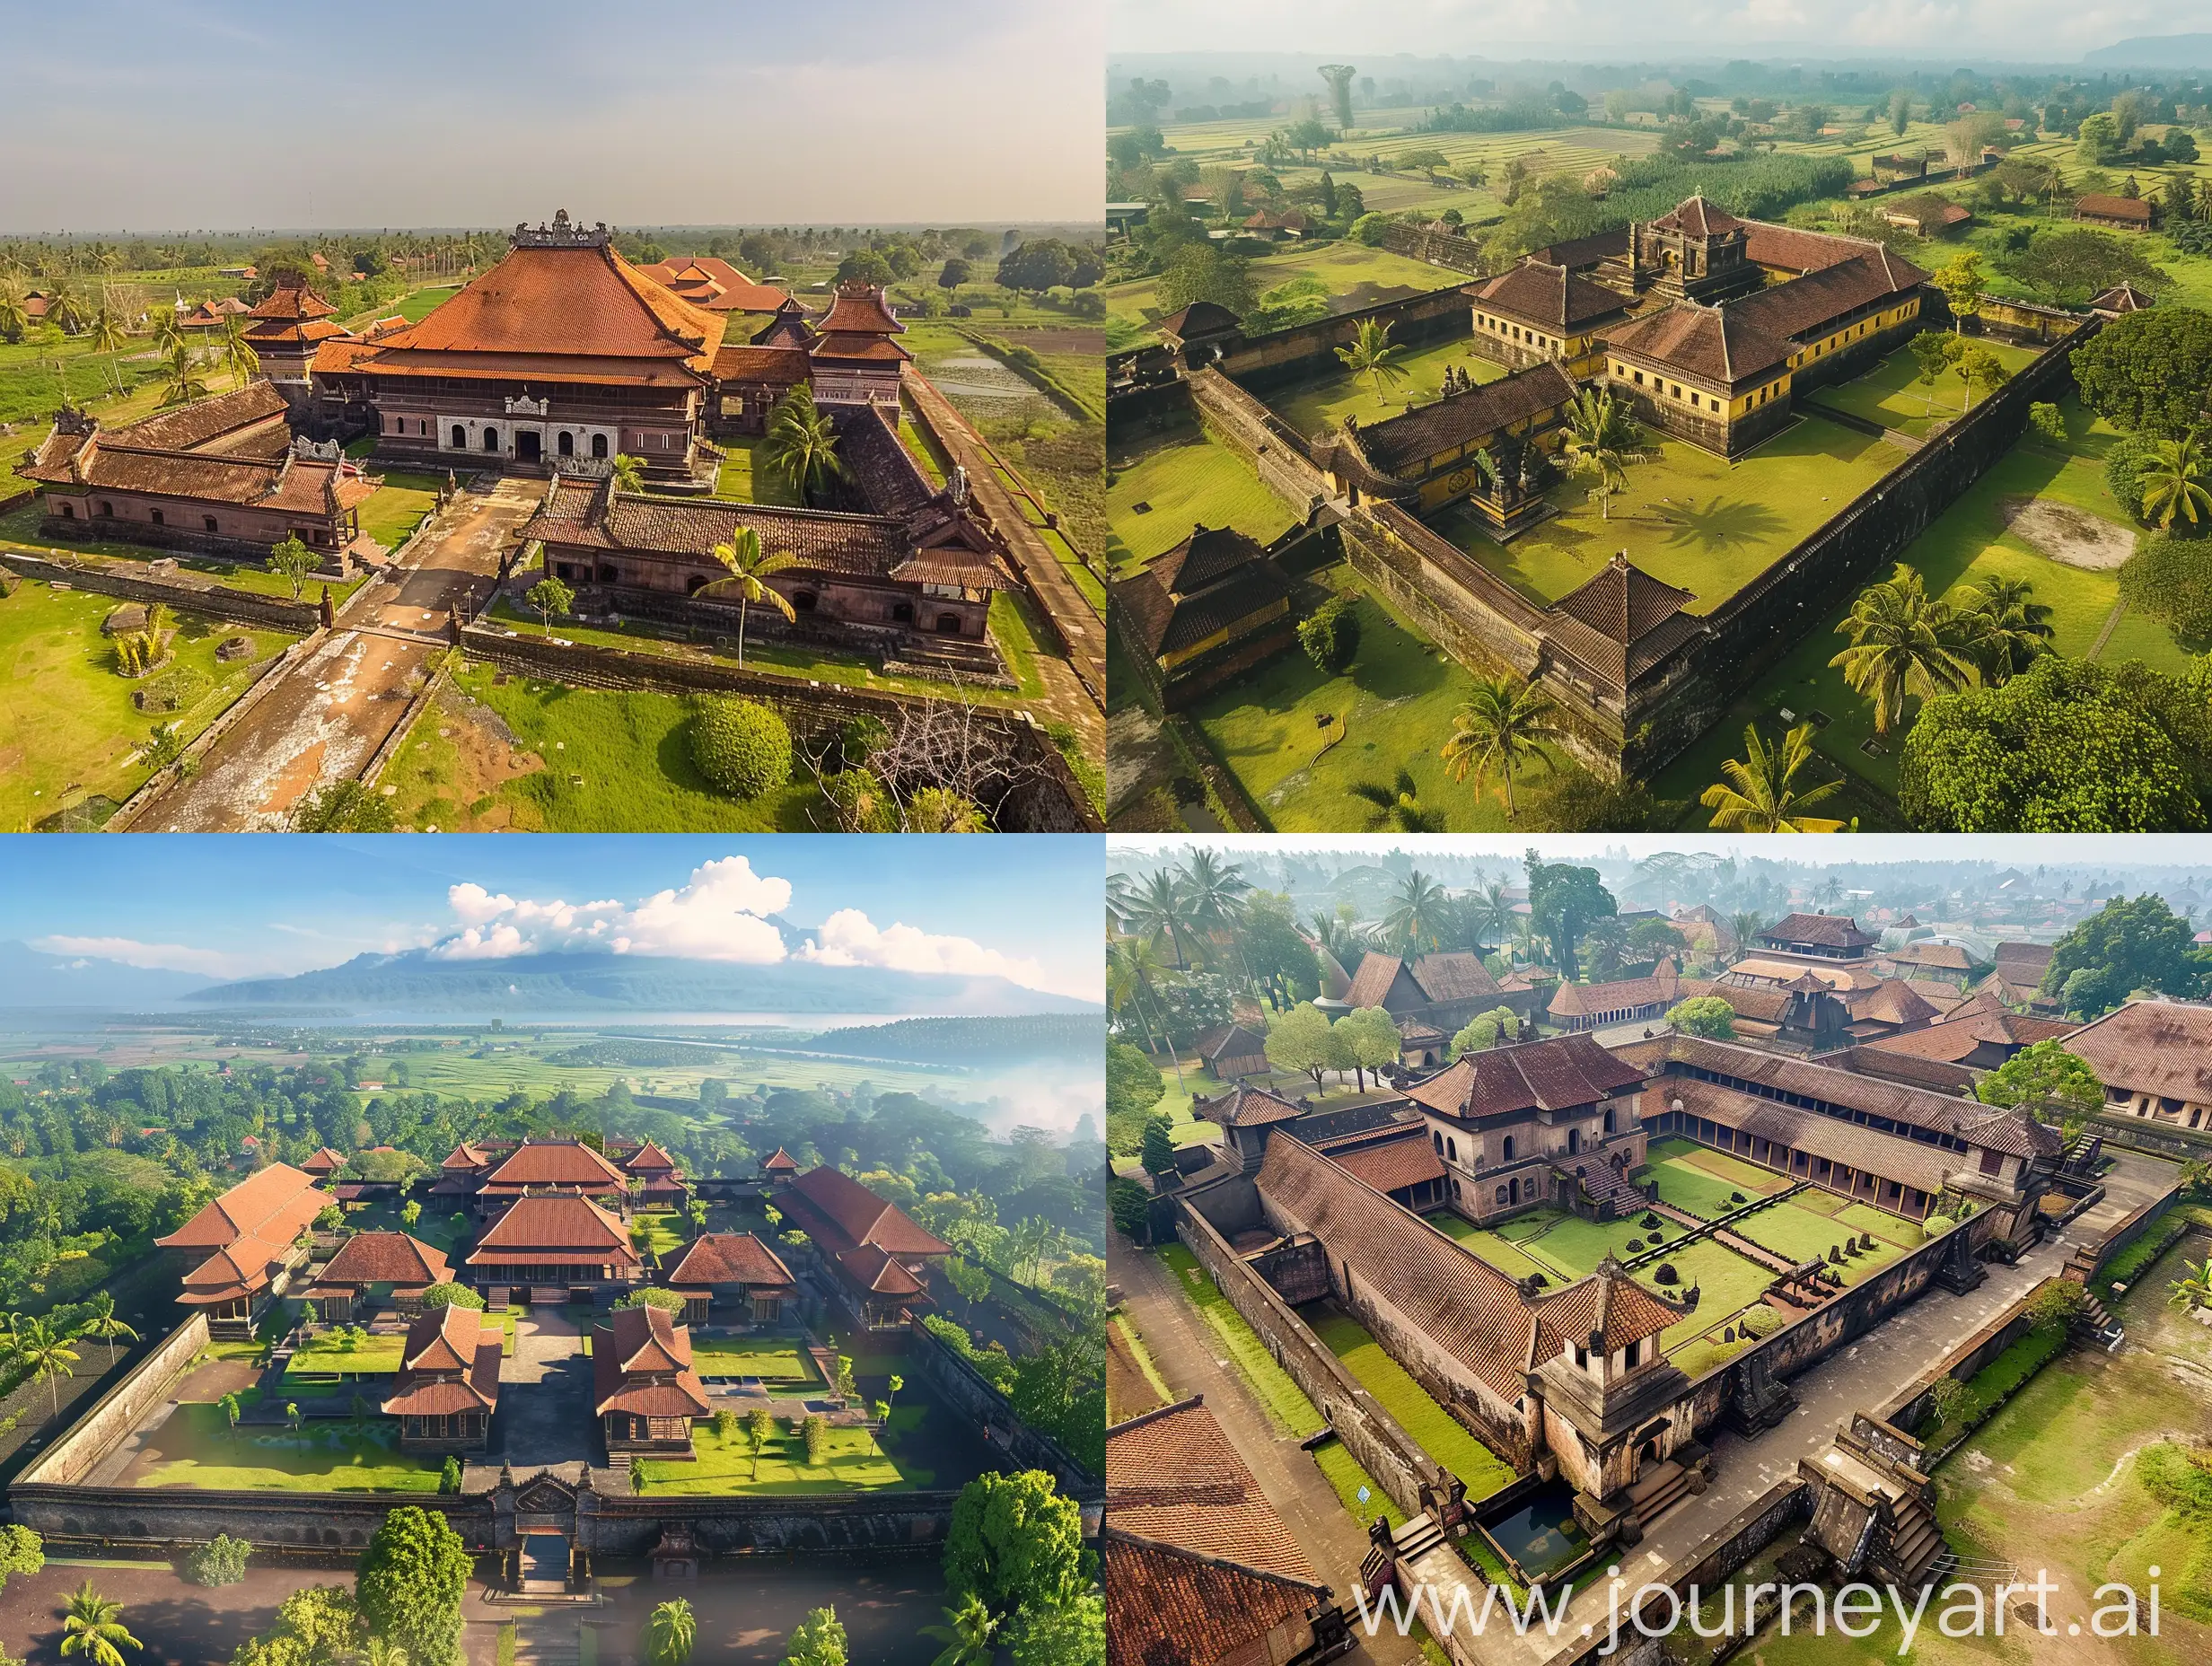 Siliwangi kingdom of Indonesia in 1500, color, a view of the royal palace, drone view